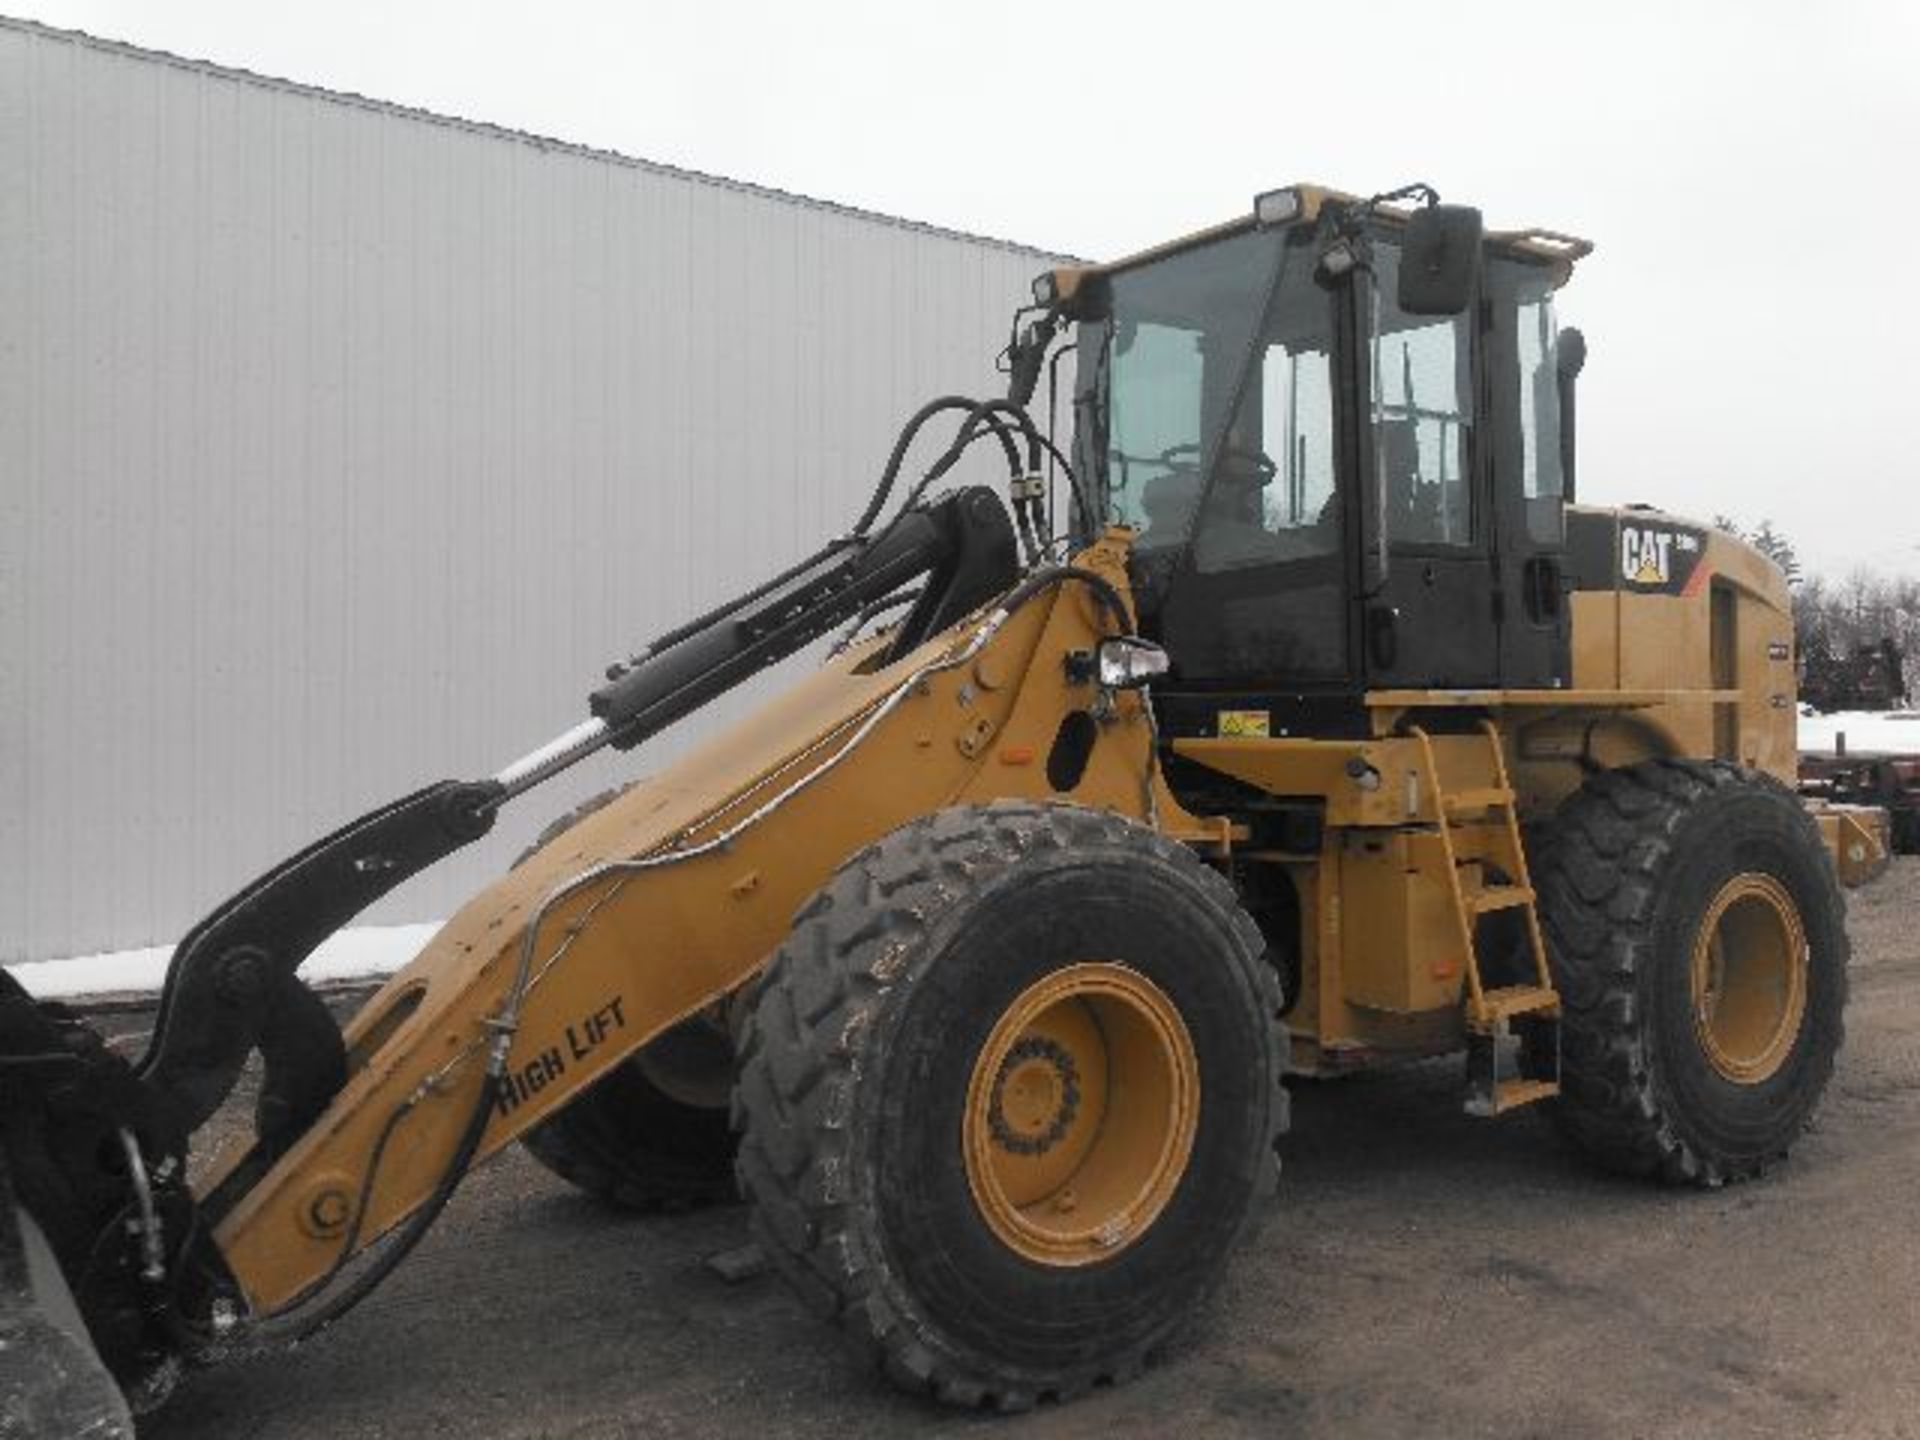 2008 Caterpillar 930H S/N CAT0930HHDHC00280, high lift,  ride control, 8,450 hrs. on meter, 9.300 - Image 10 of 14